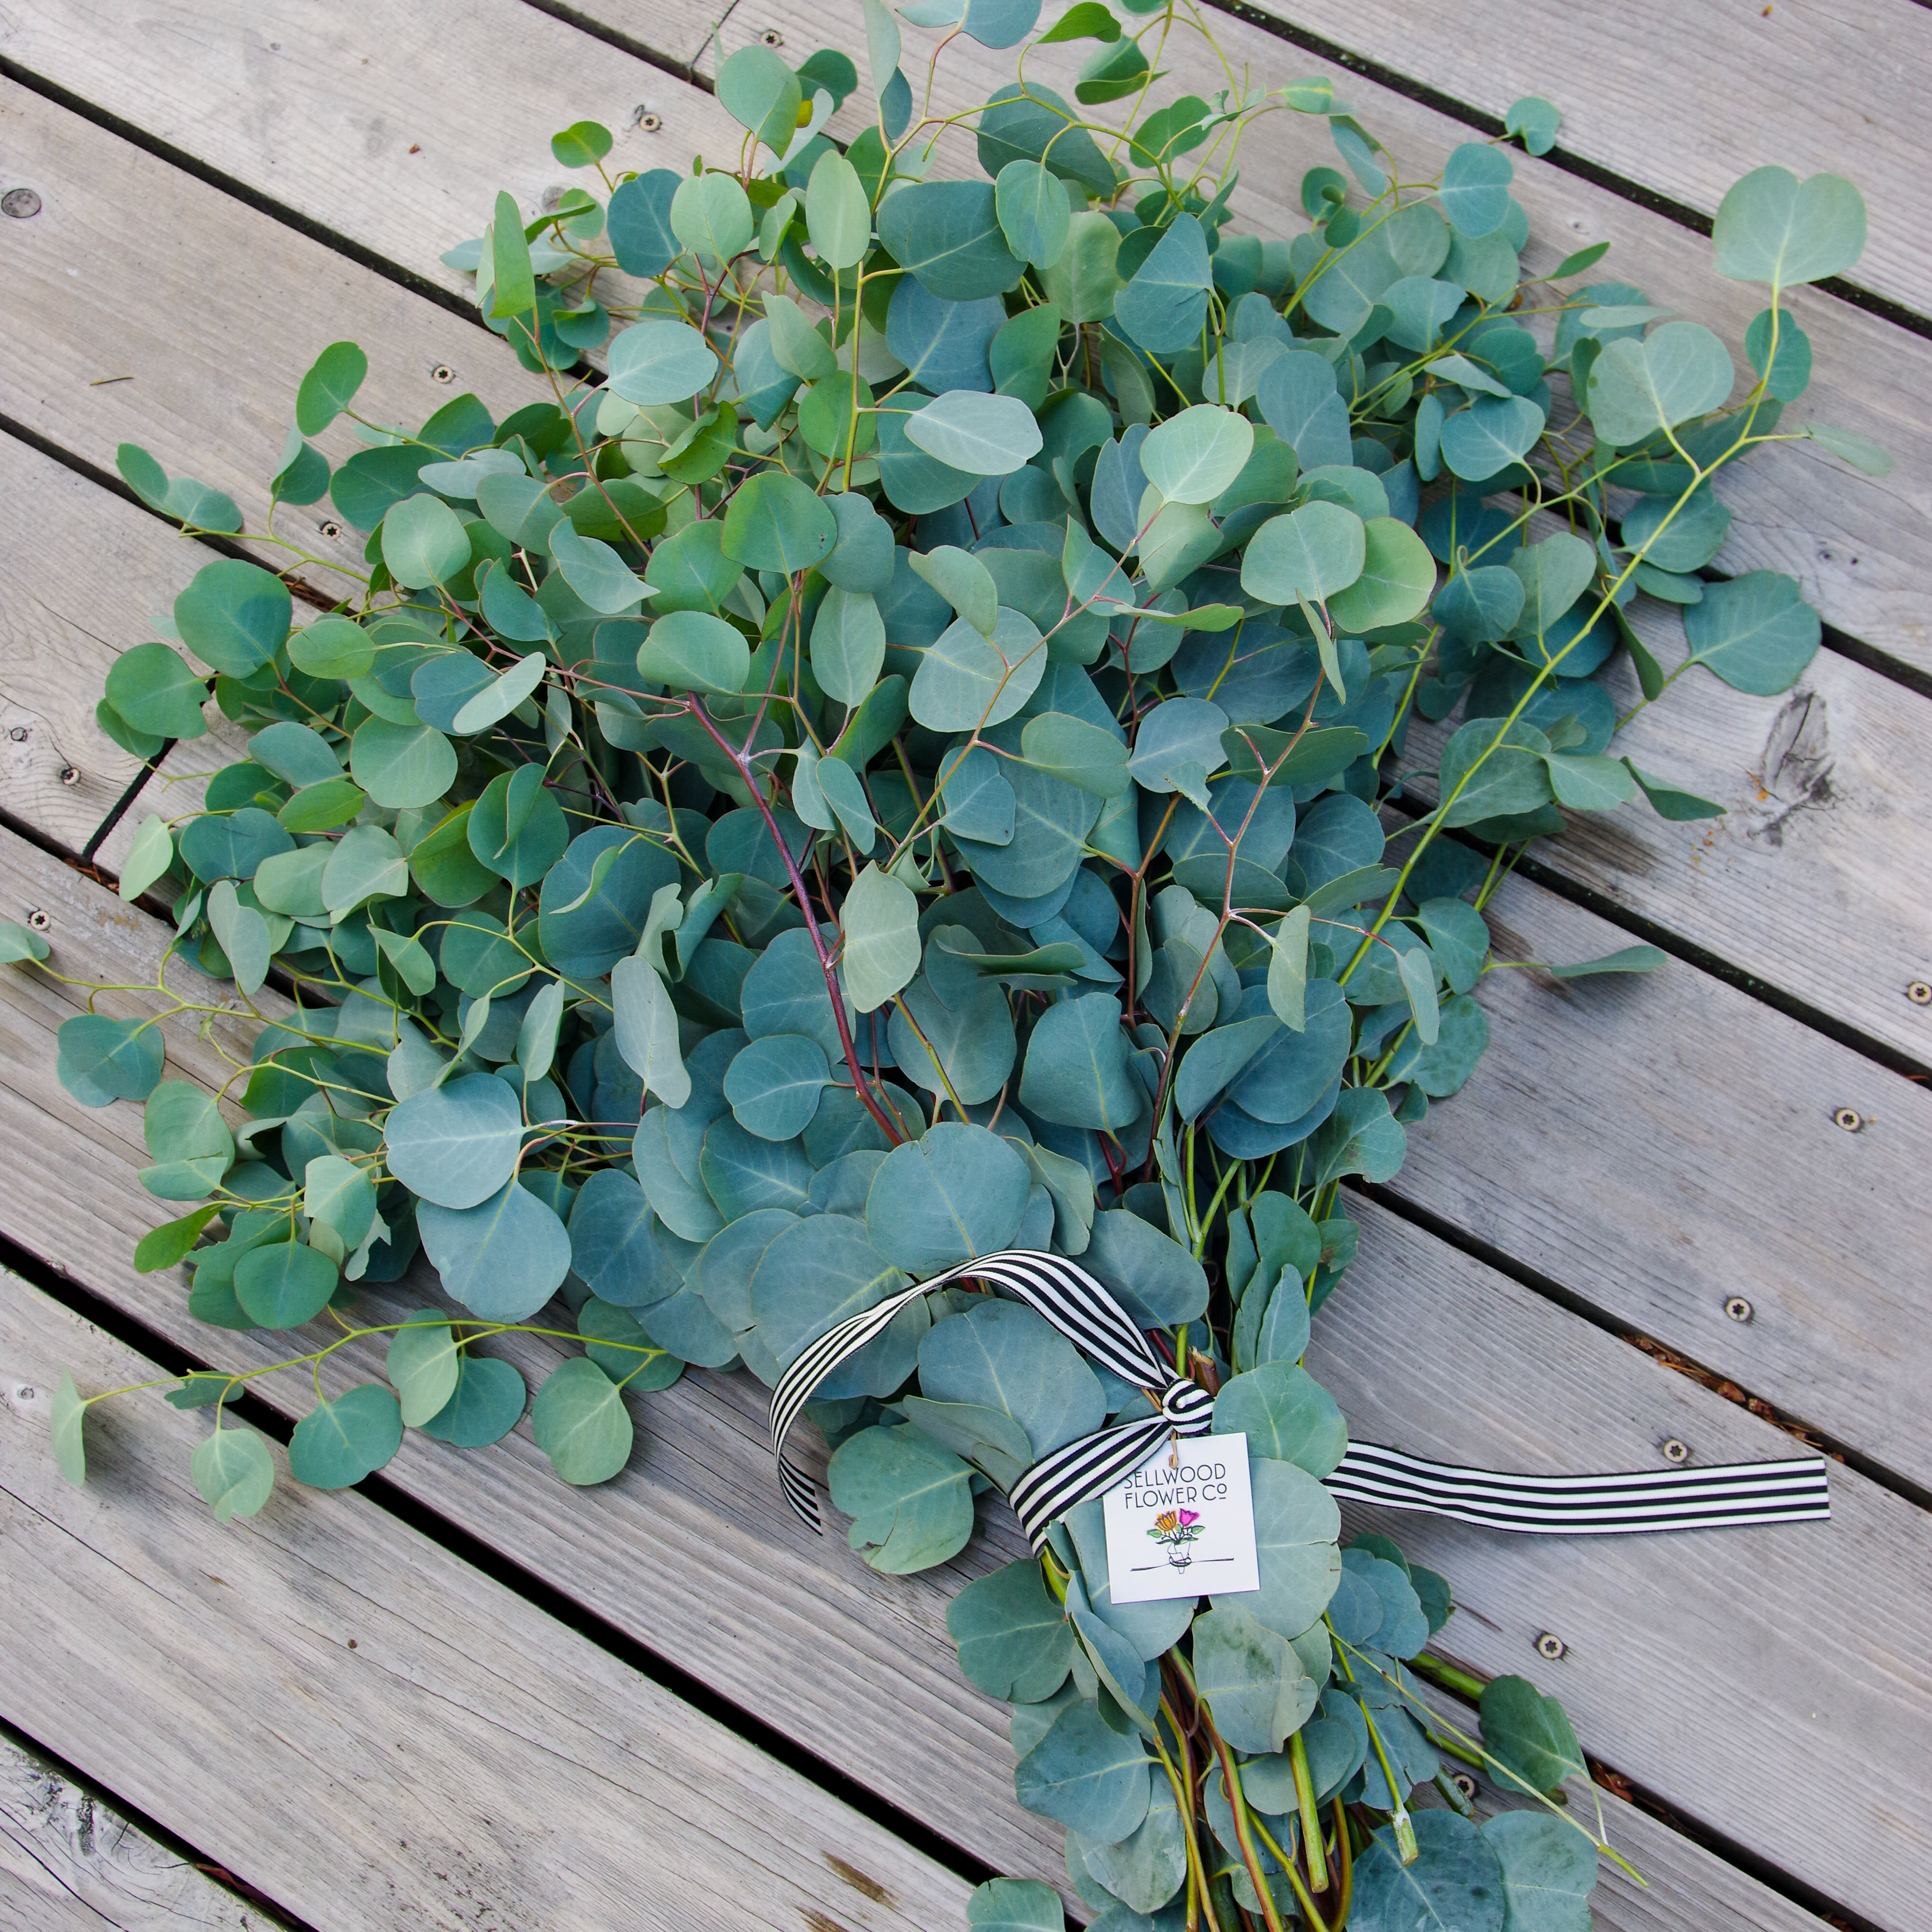 Eucalyptus Lover - One large hand tied bunch of fresh local eucalyptus. Eucalyptus is a great way to add some texture and interest to a fireplace mantel or sideboard. 